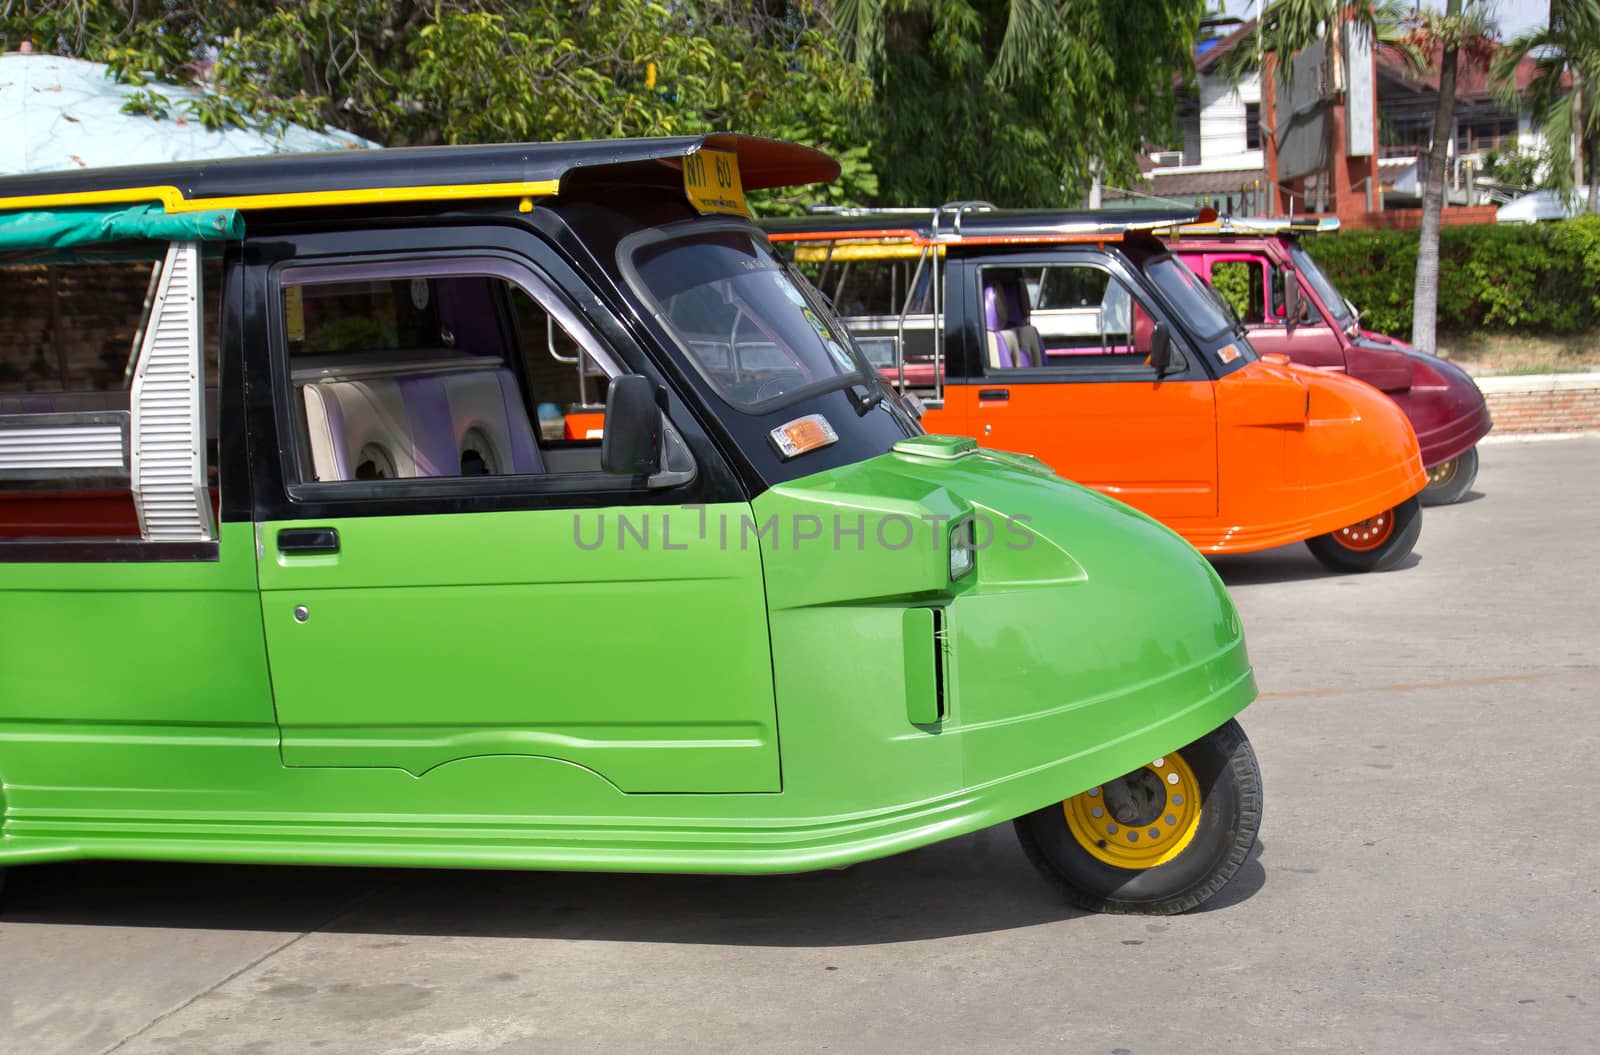 Tuk tuks lined up in a side ally in Thailand by sutipp11